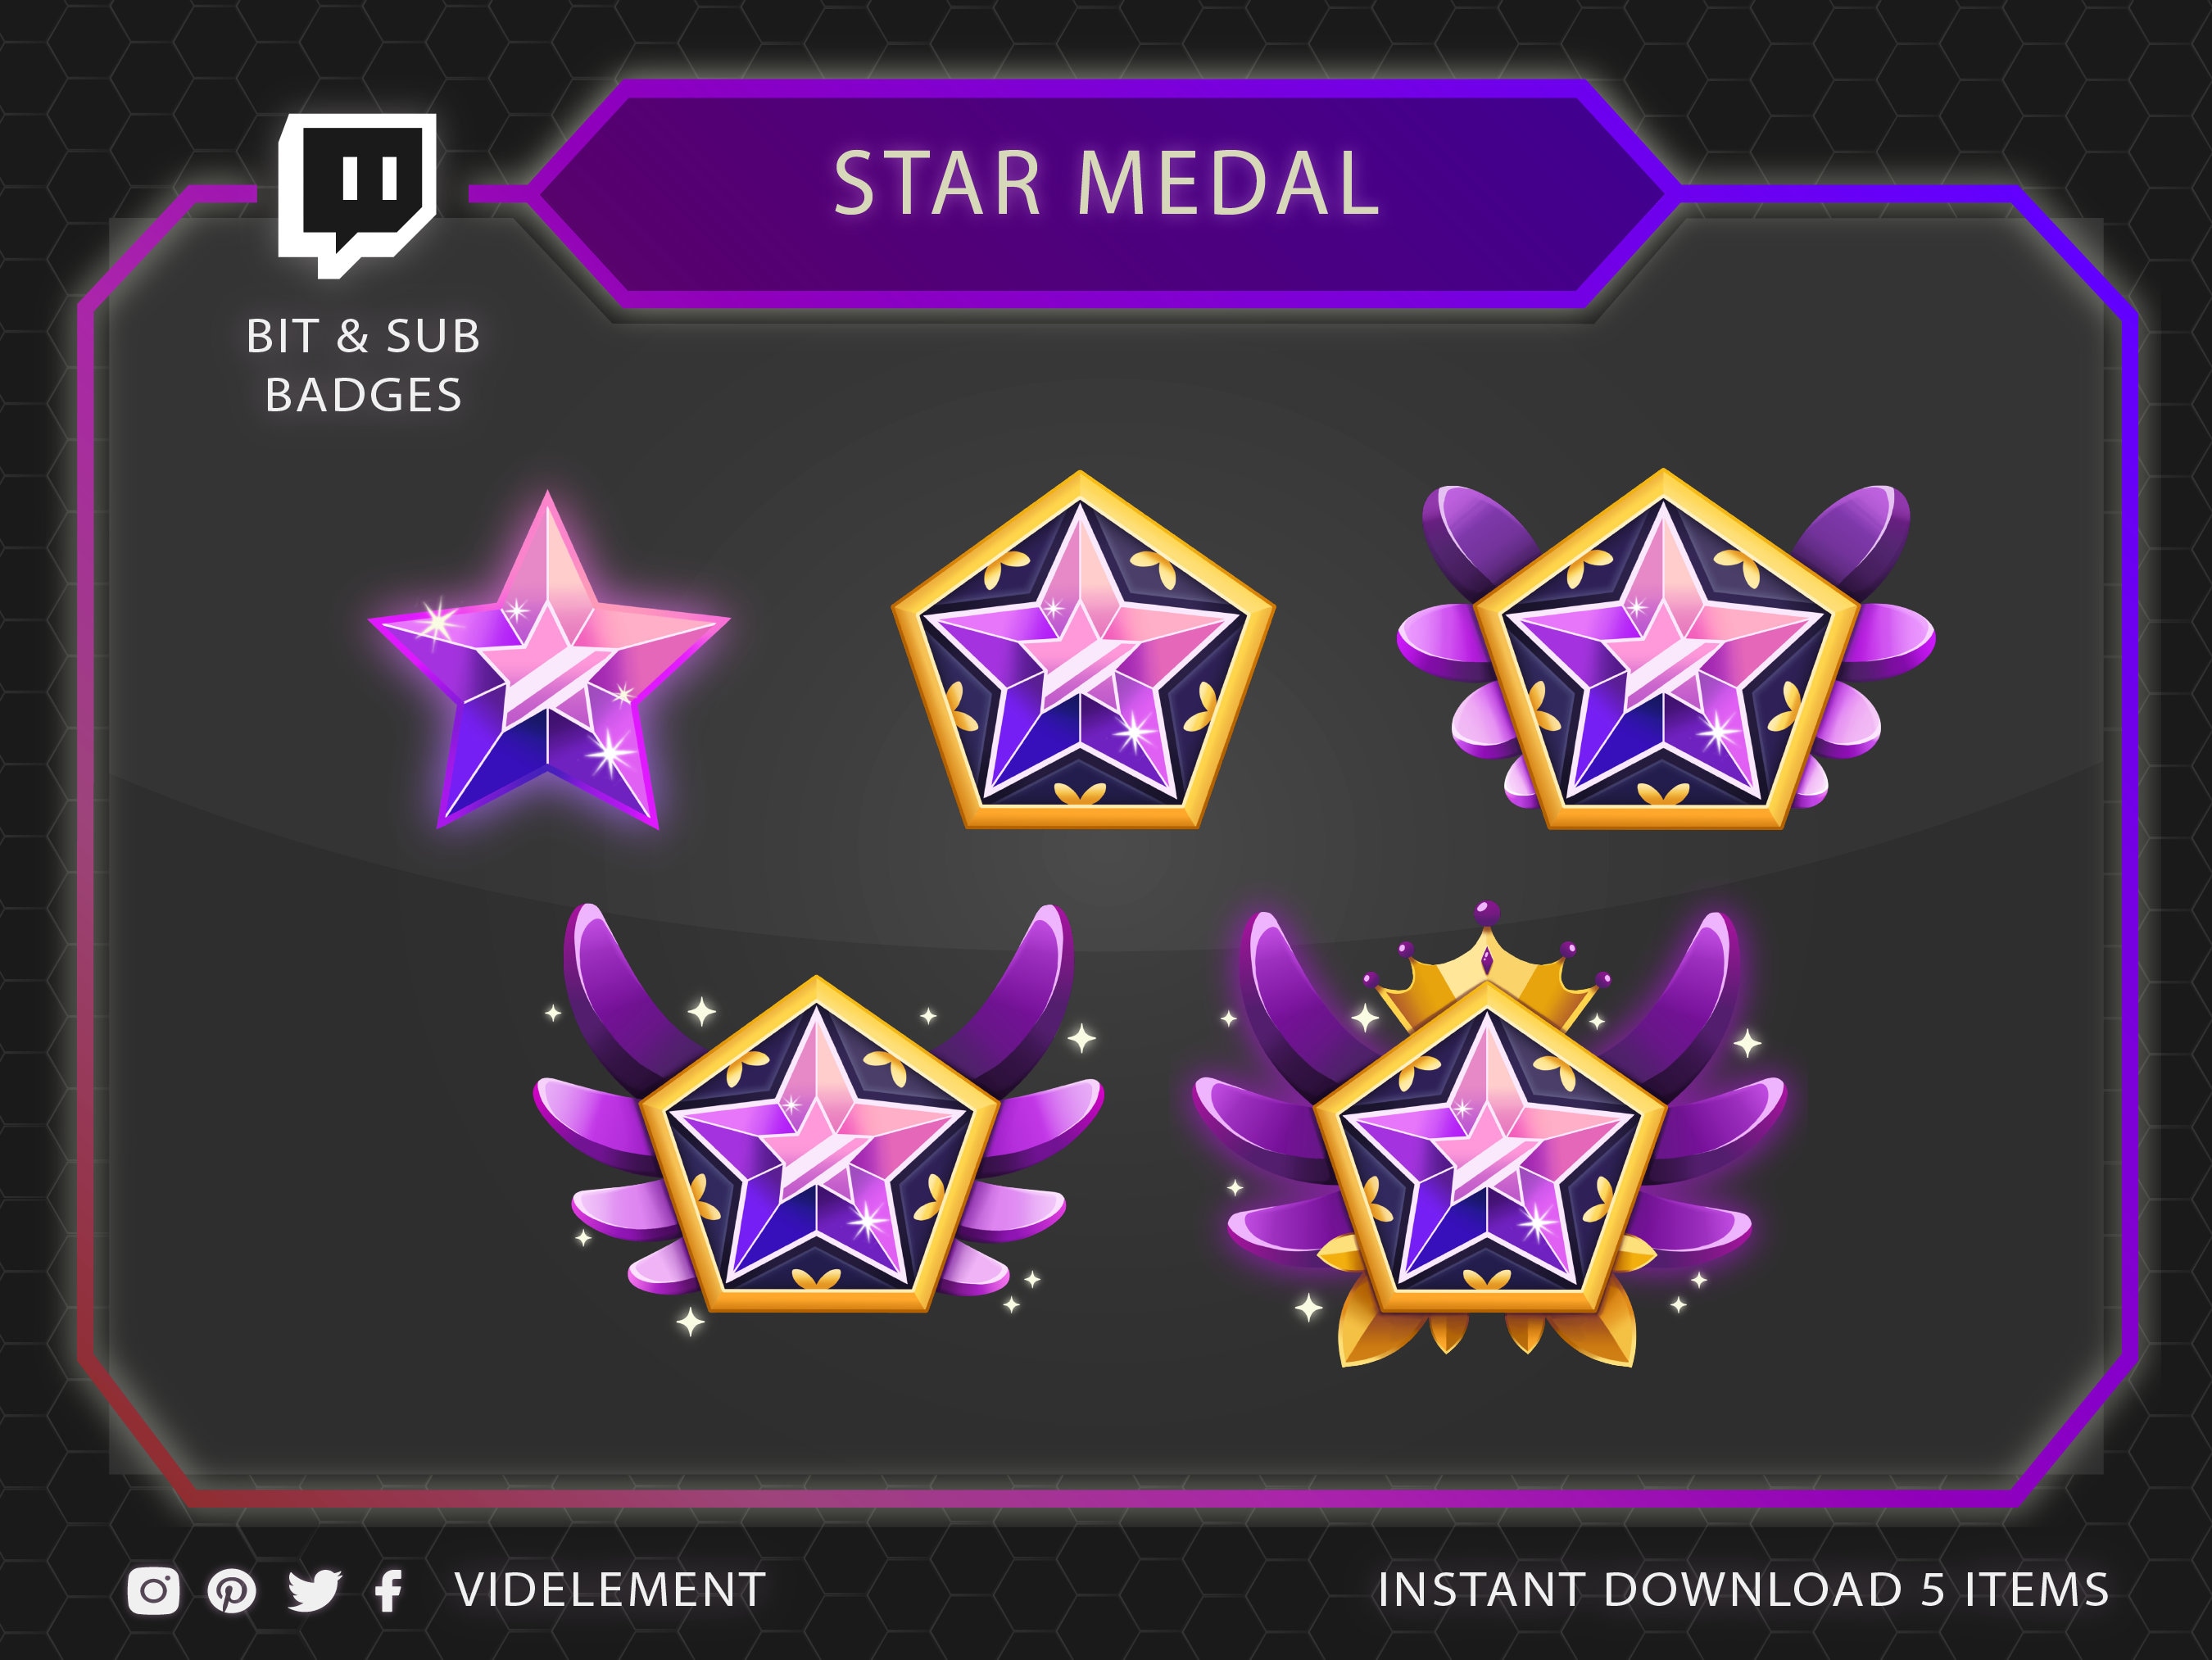 Stars Twitch Badges - Gaming Visuals